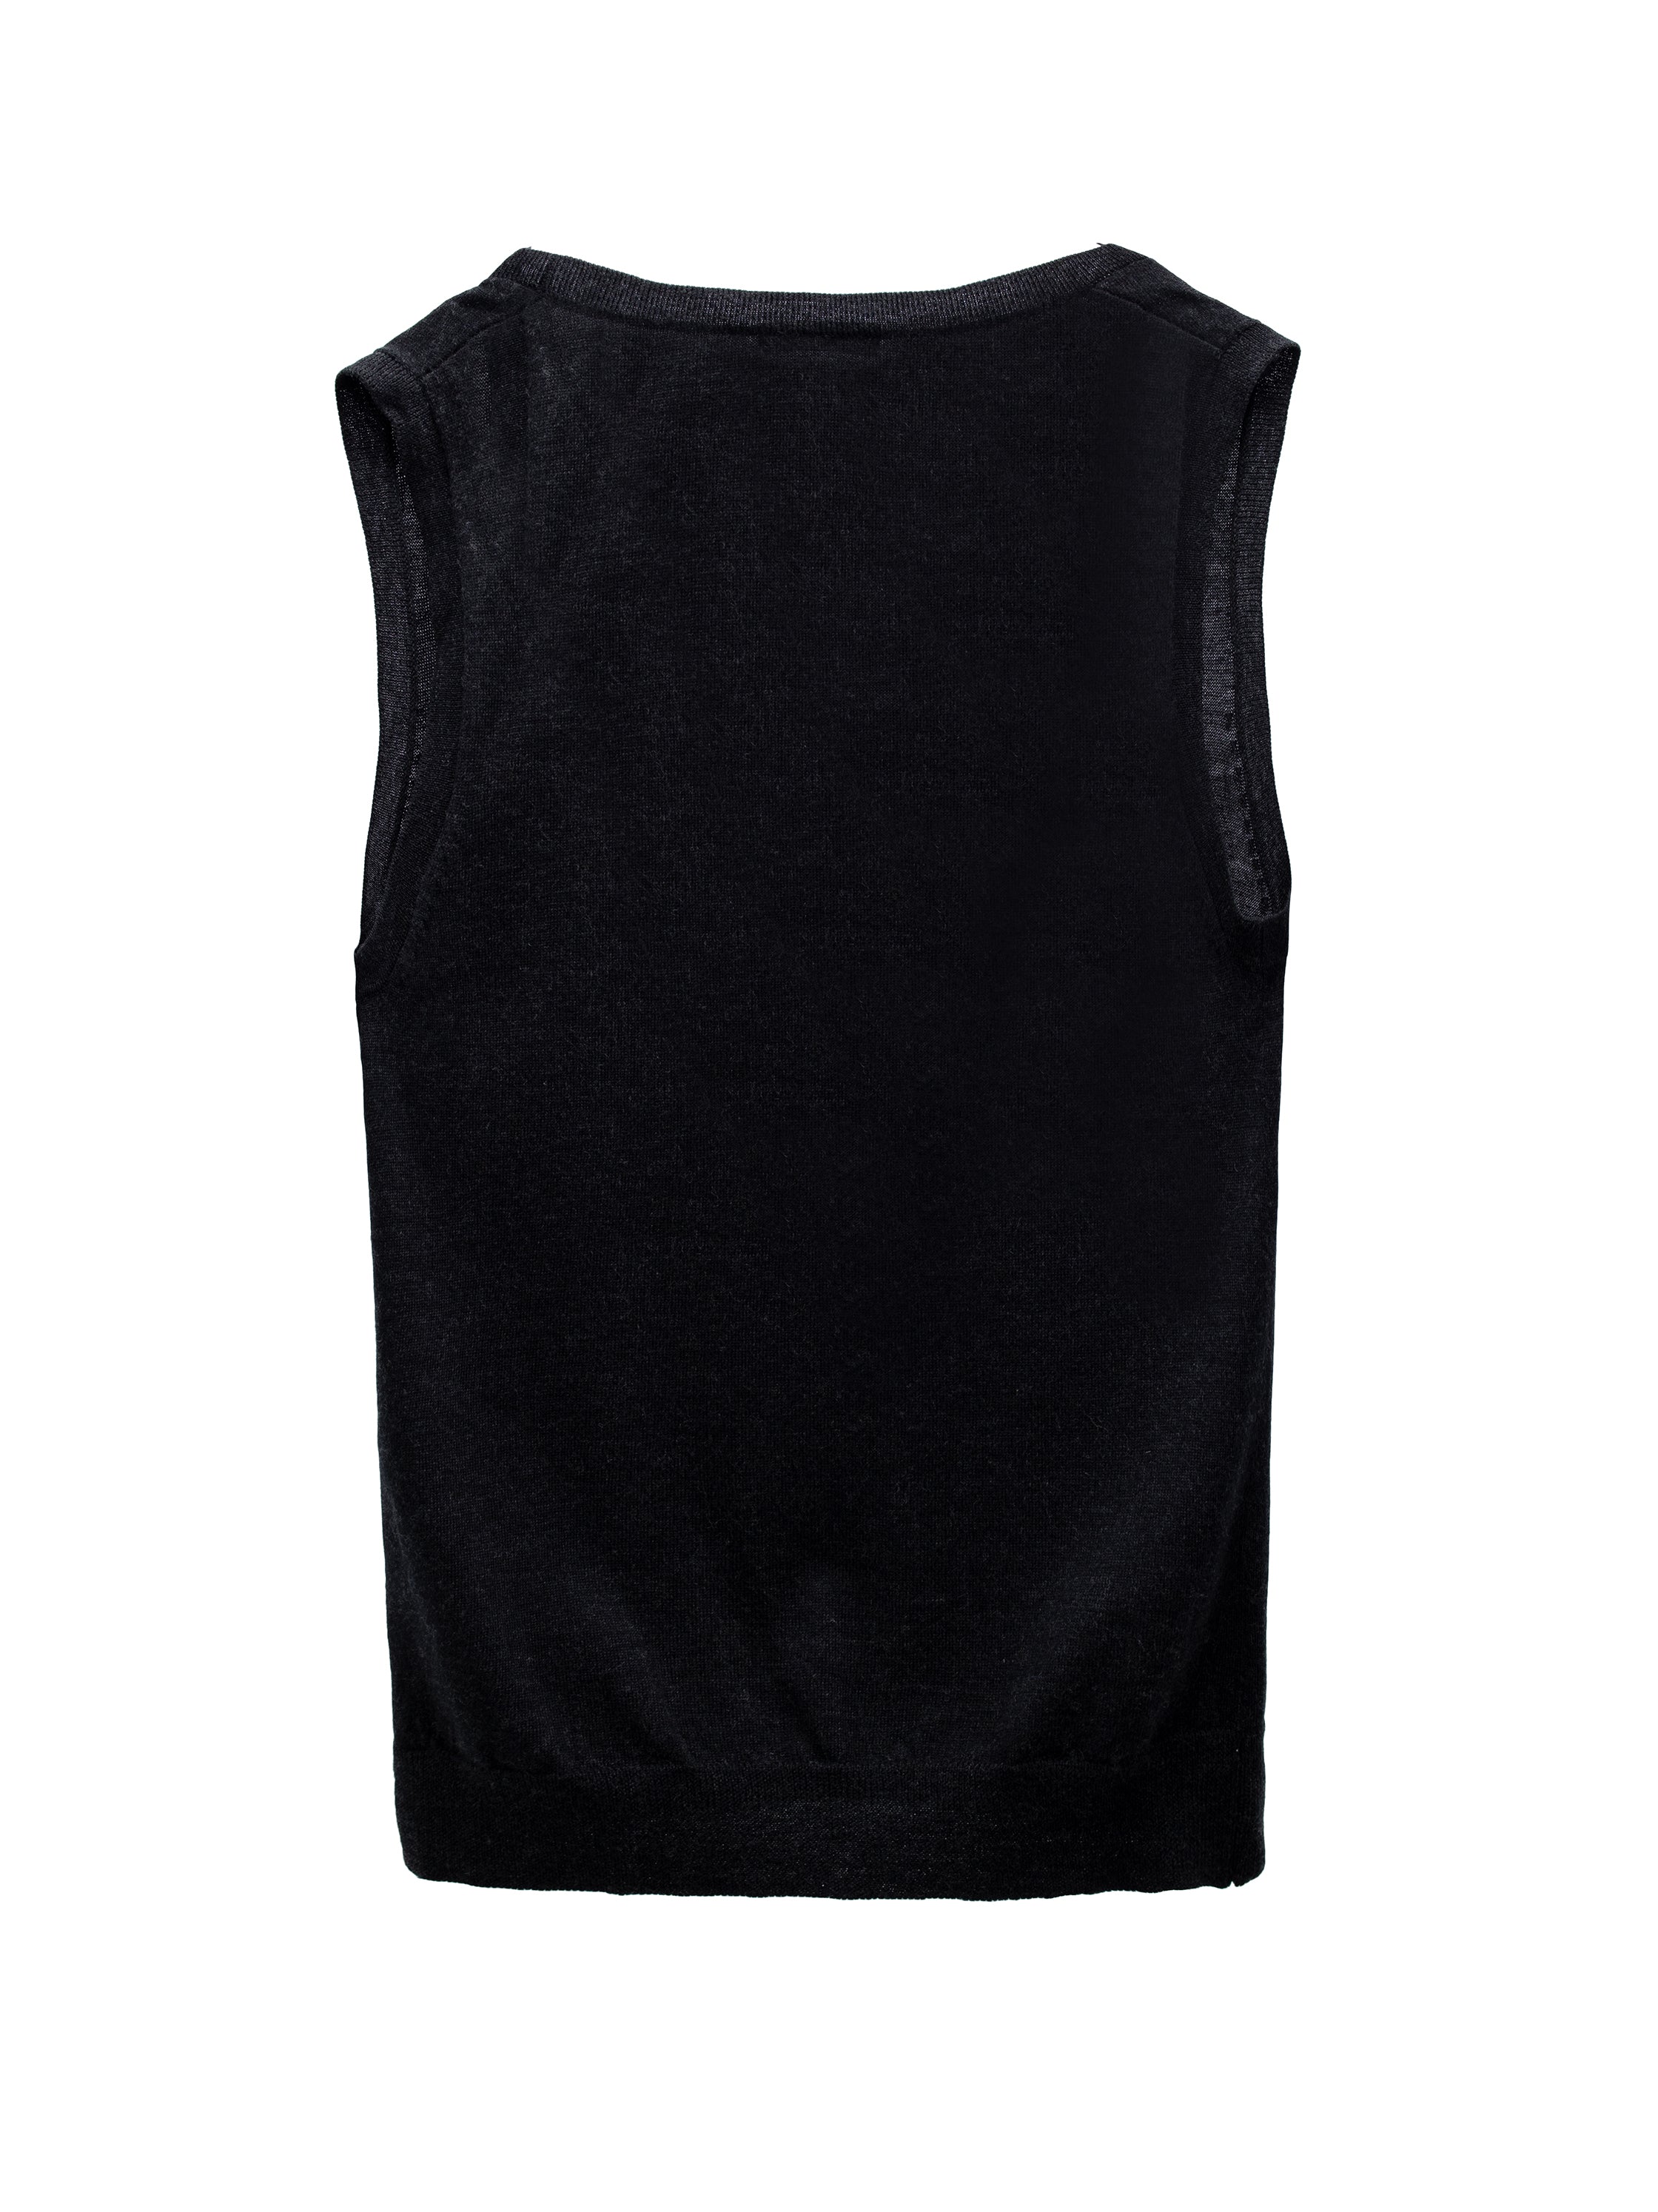 BLACK BUTTON UP KNITTED VEST